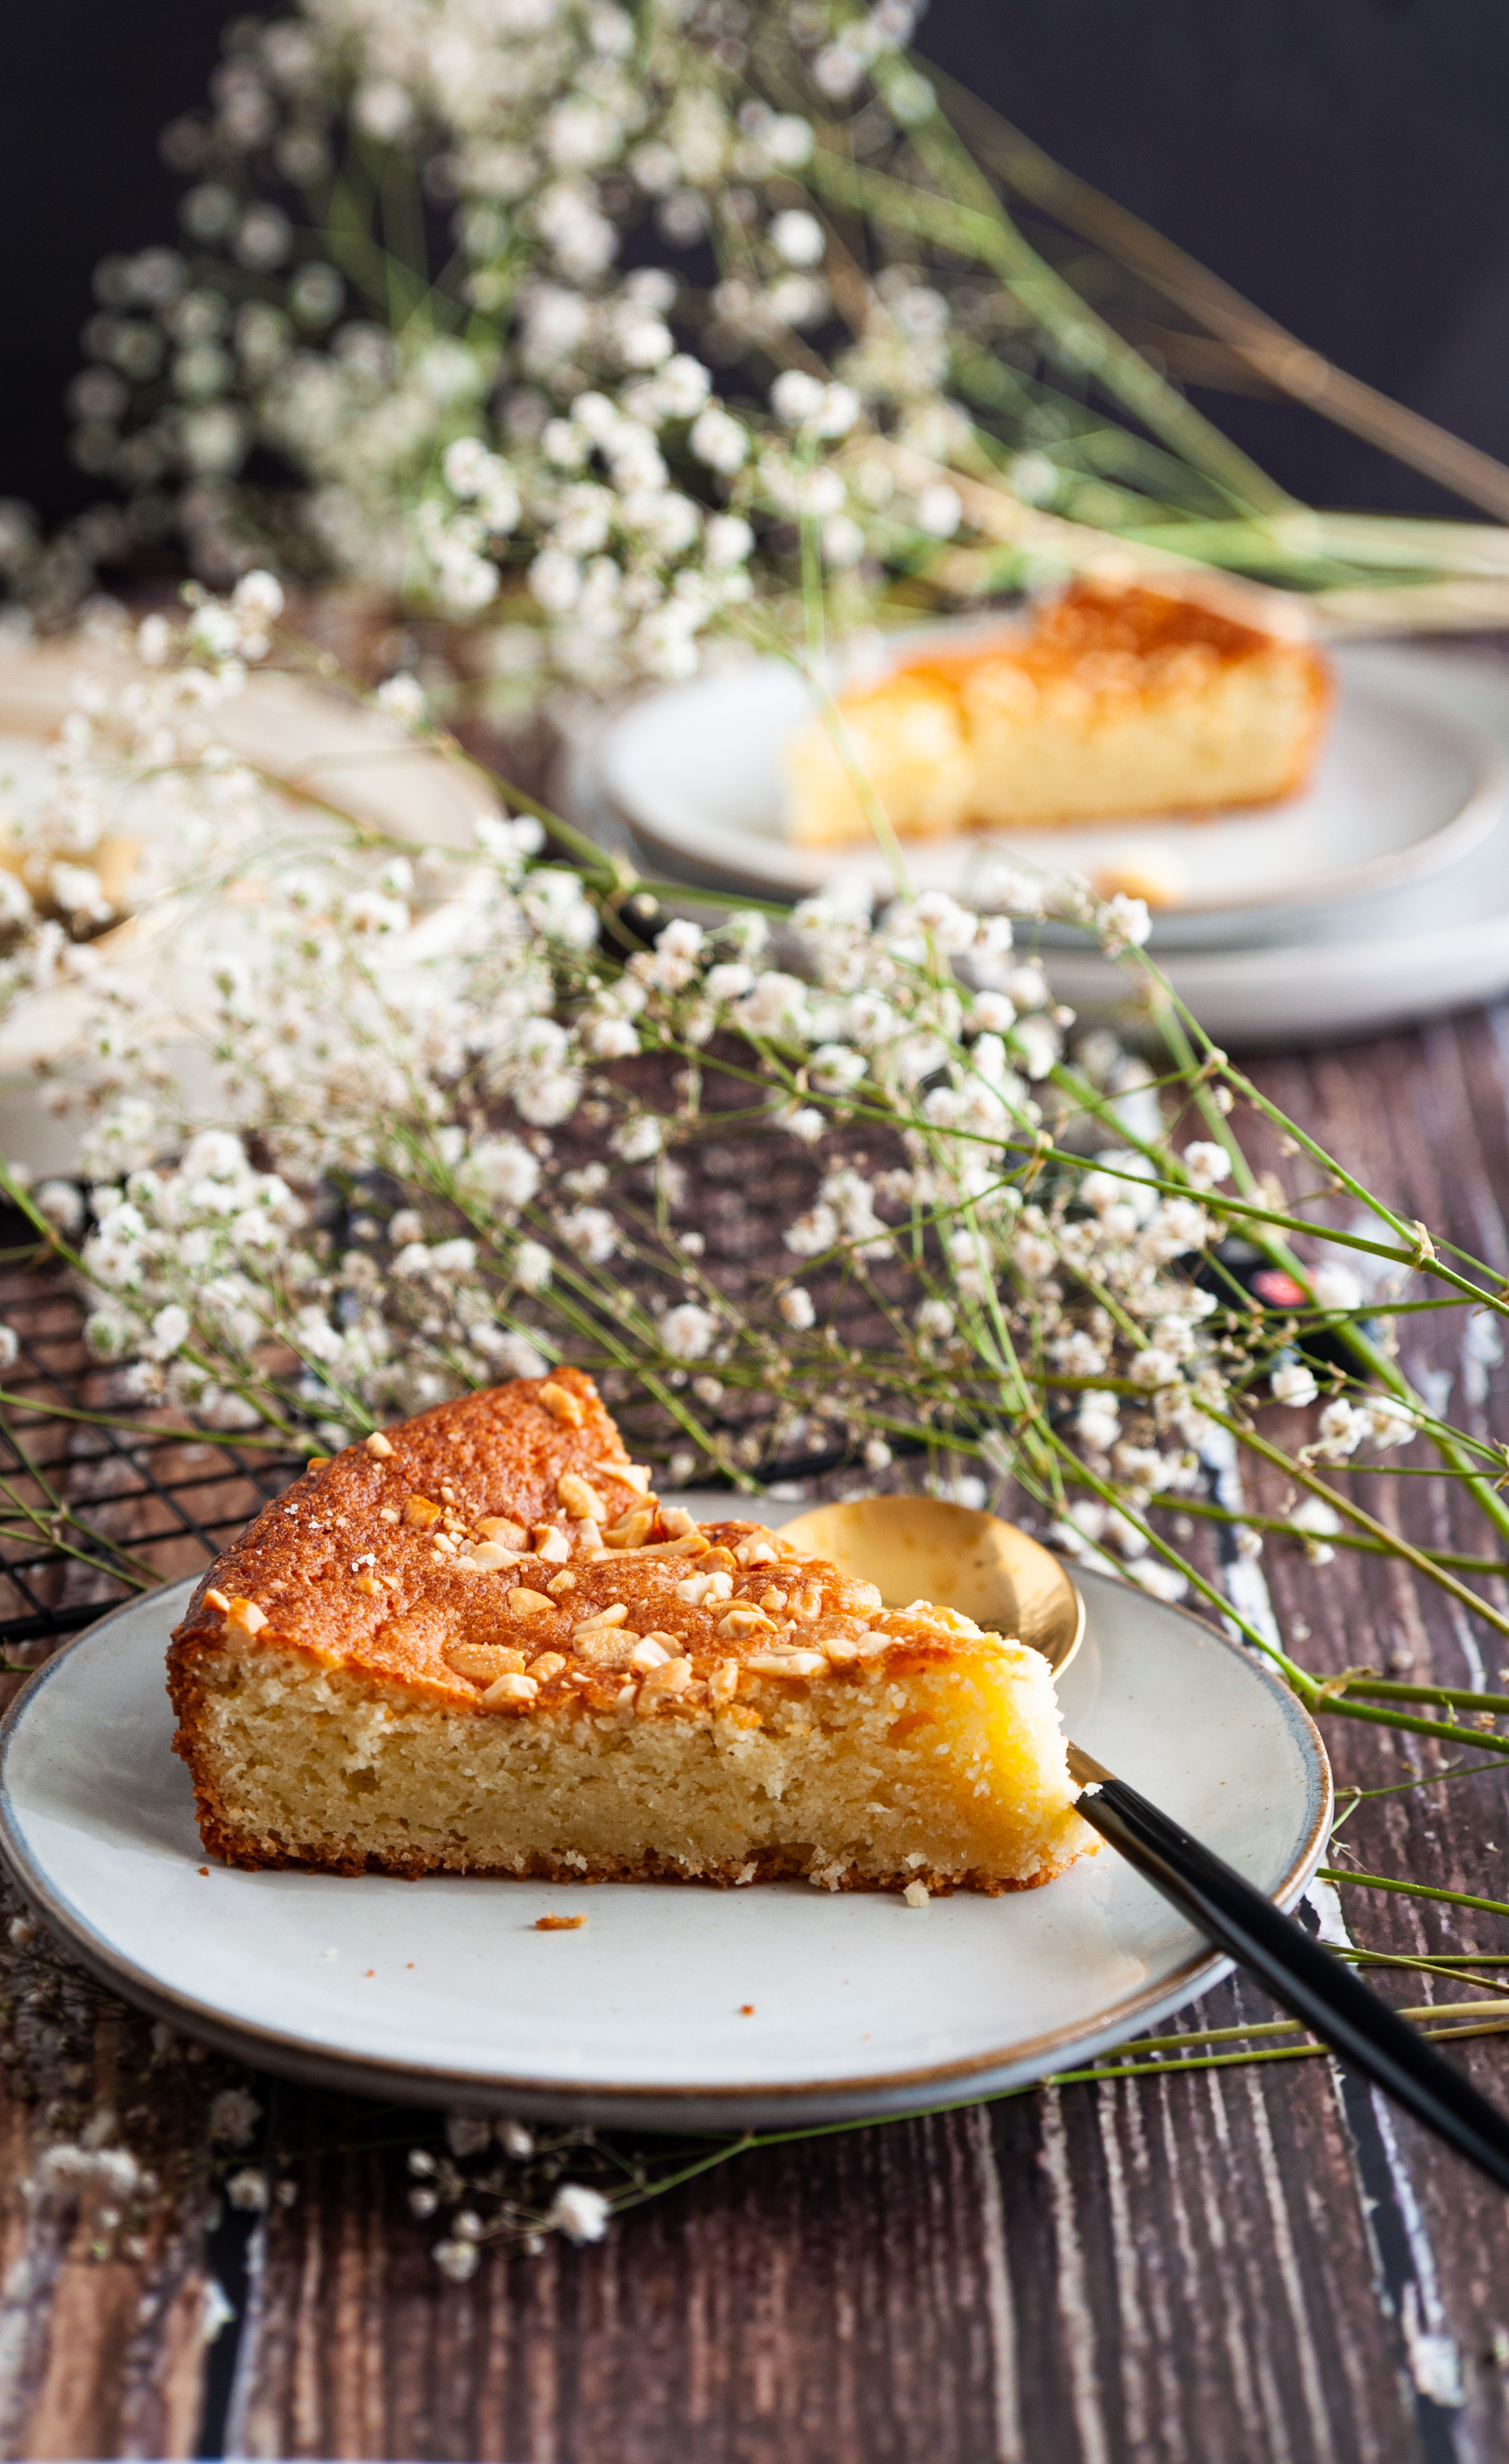 A light and fluffy Gluten Free almond flour cake to be enjoyed with your morning coffee or afternoon tea.